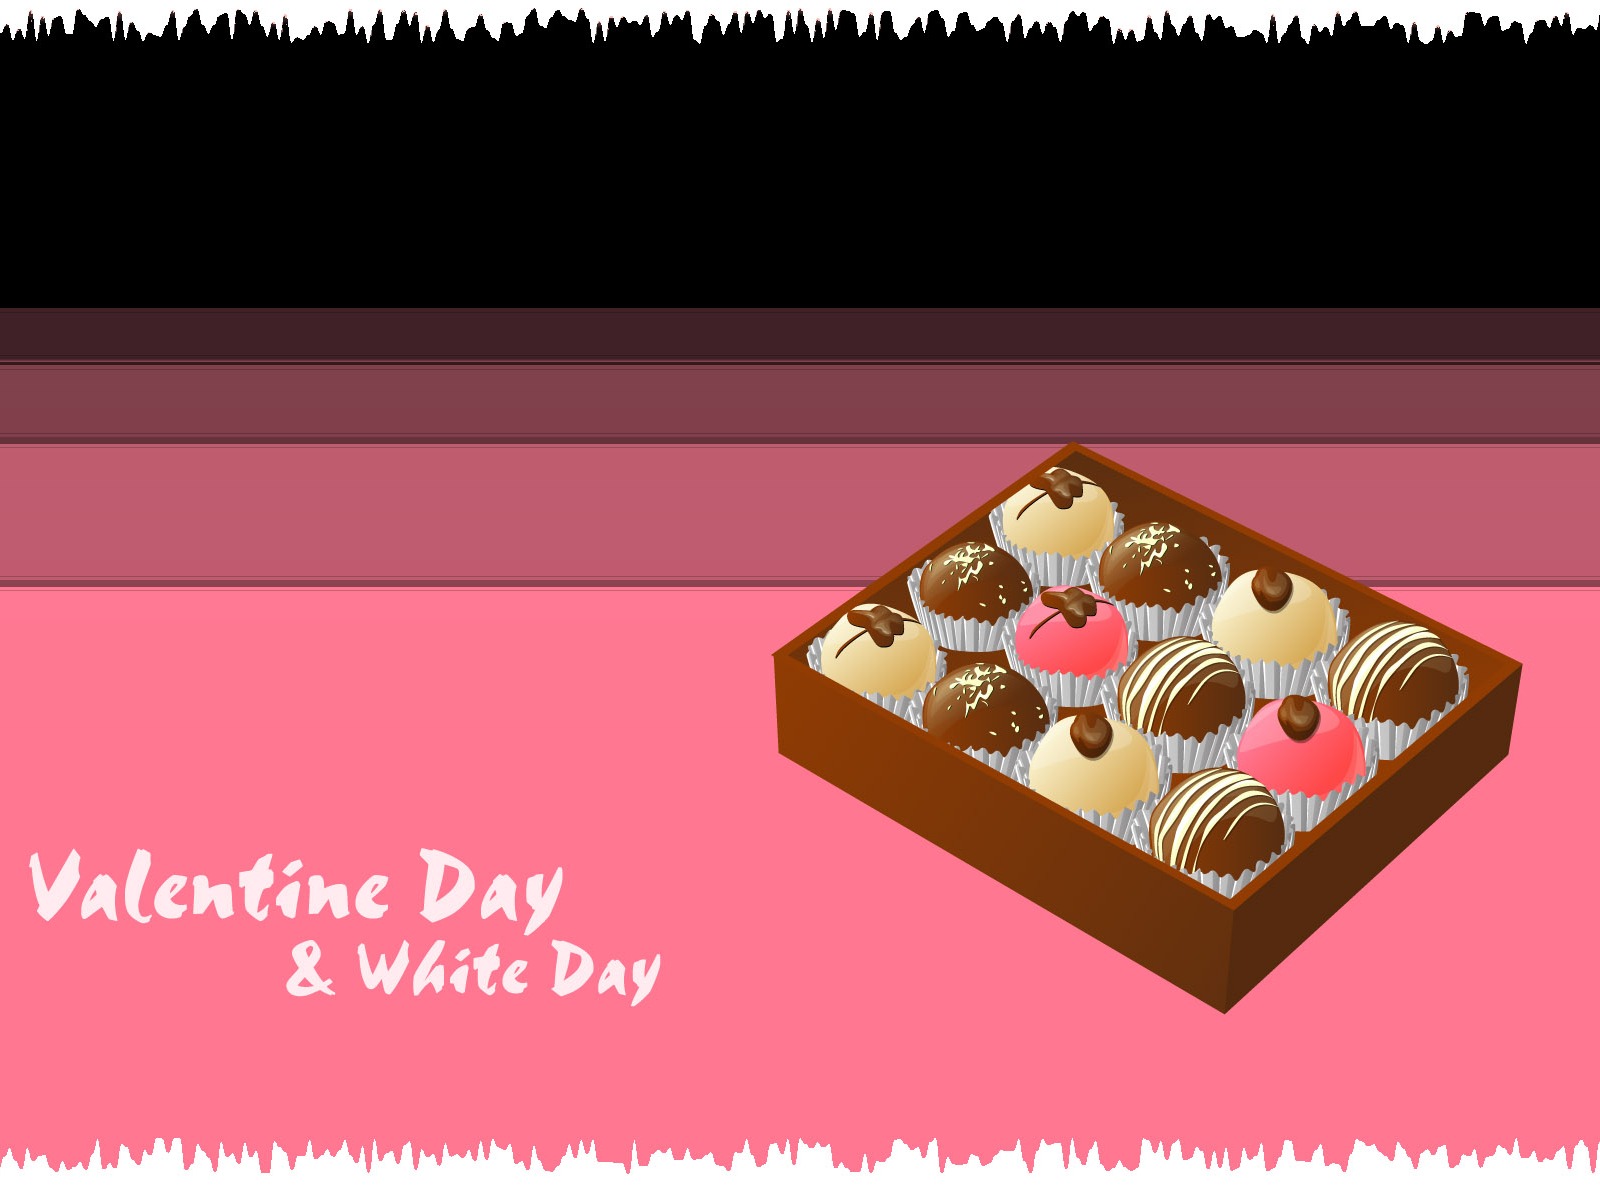 Valentine's Day Theme Wallpapers (1) #9 - 1600x1200